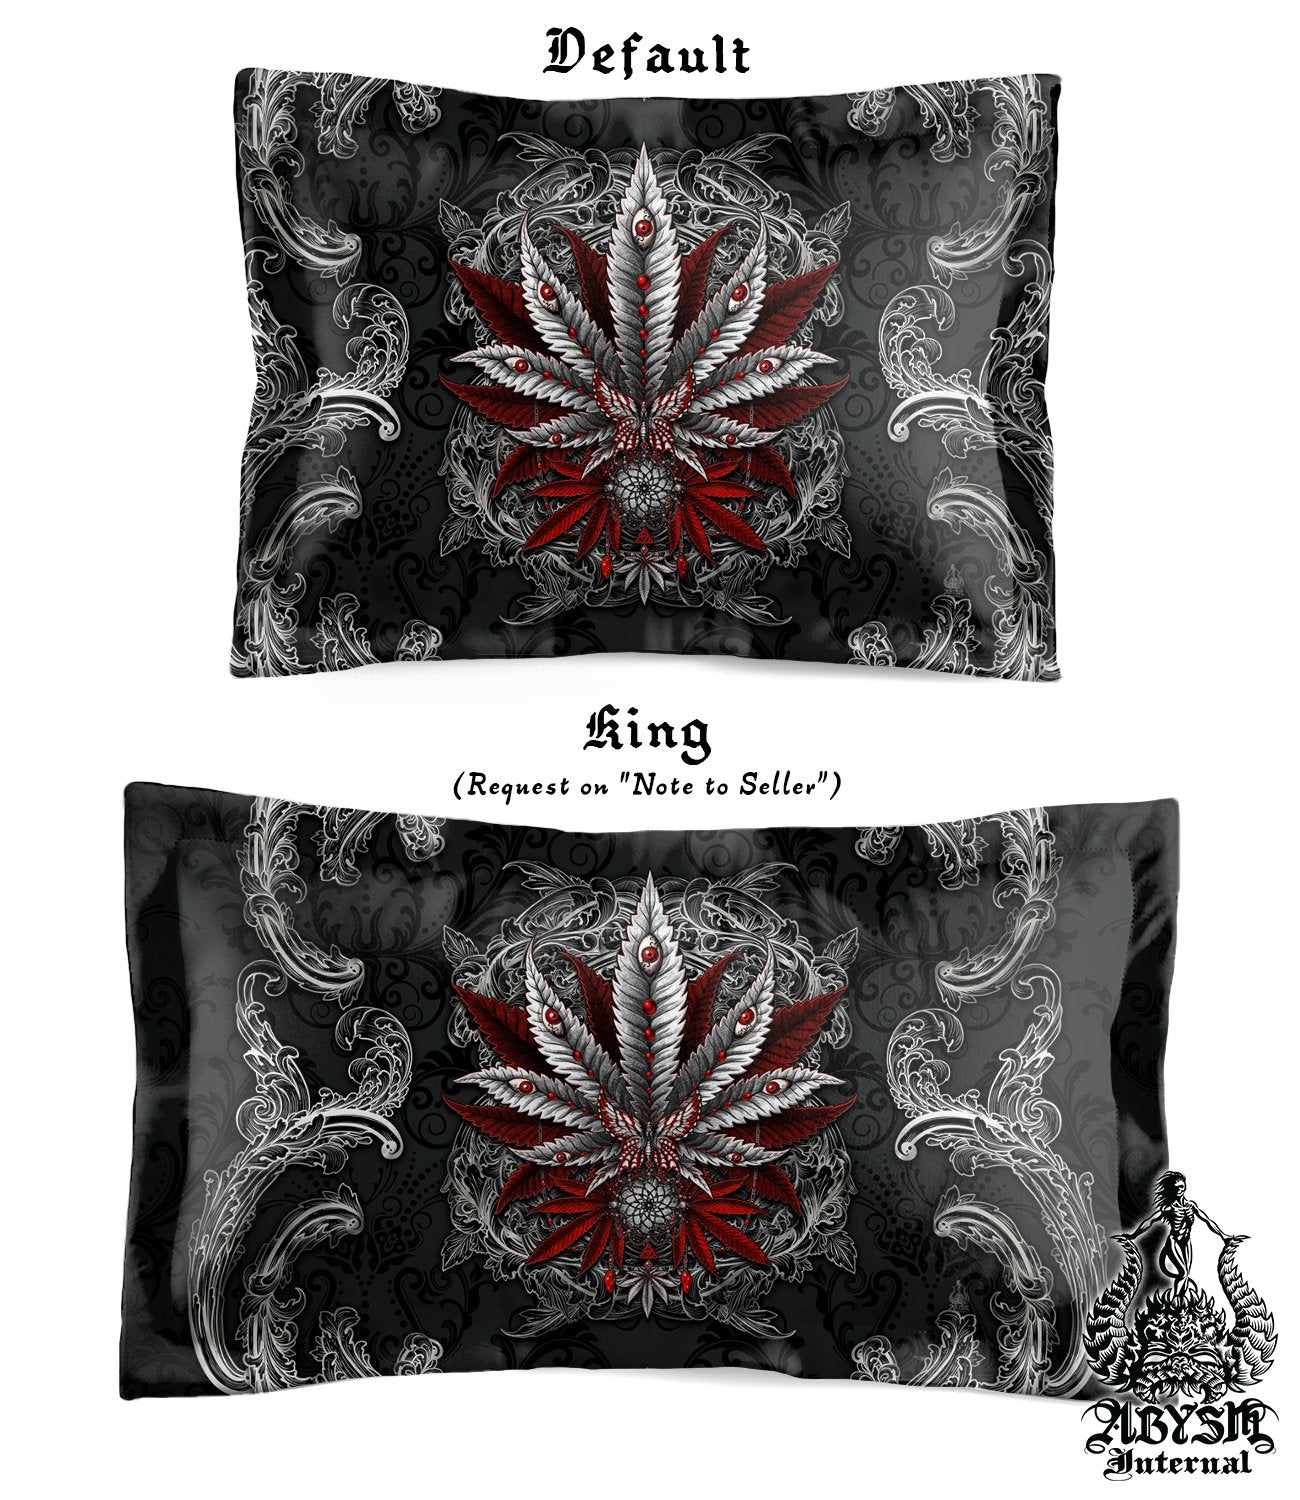 Gothic Weed Bedding Set, Comforter and Duvet, Cannabis Bed Cover, Marijuana Bedroom Decor, King, Queen and Twin Size, 420 Room Art - Dark - Abysm Internal